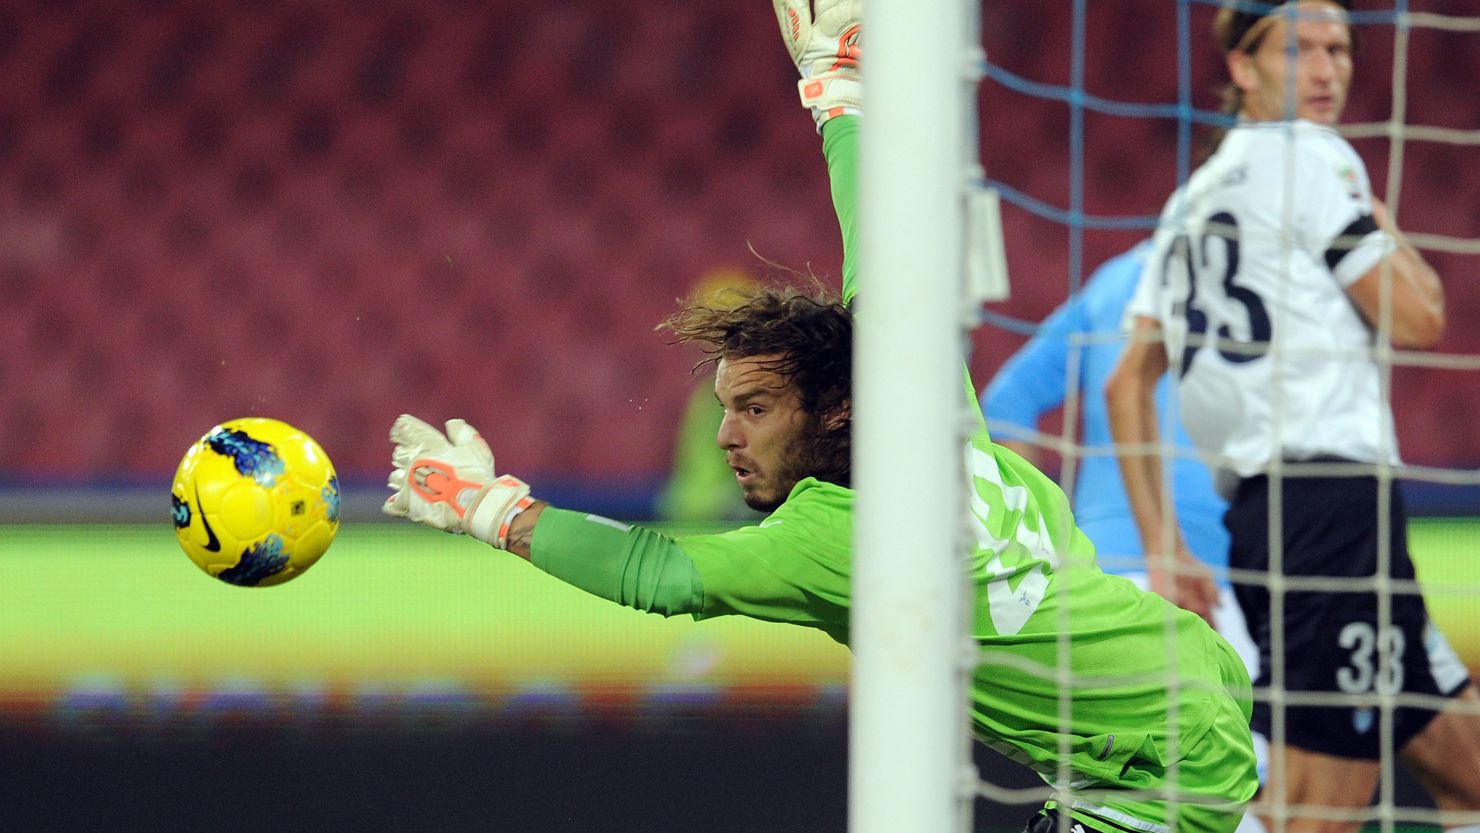 Lazio goalkeeper Federico Marchetti kept out Napoli's best efforts in Saturday's stalemate.